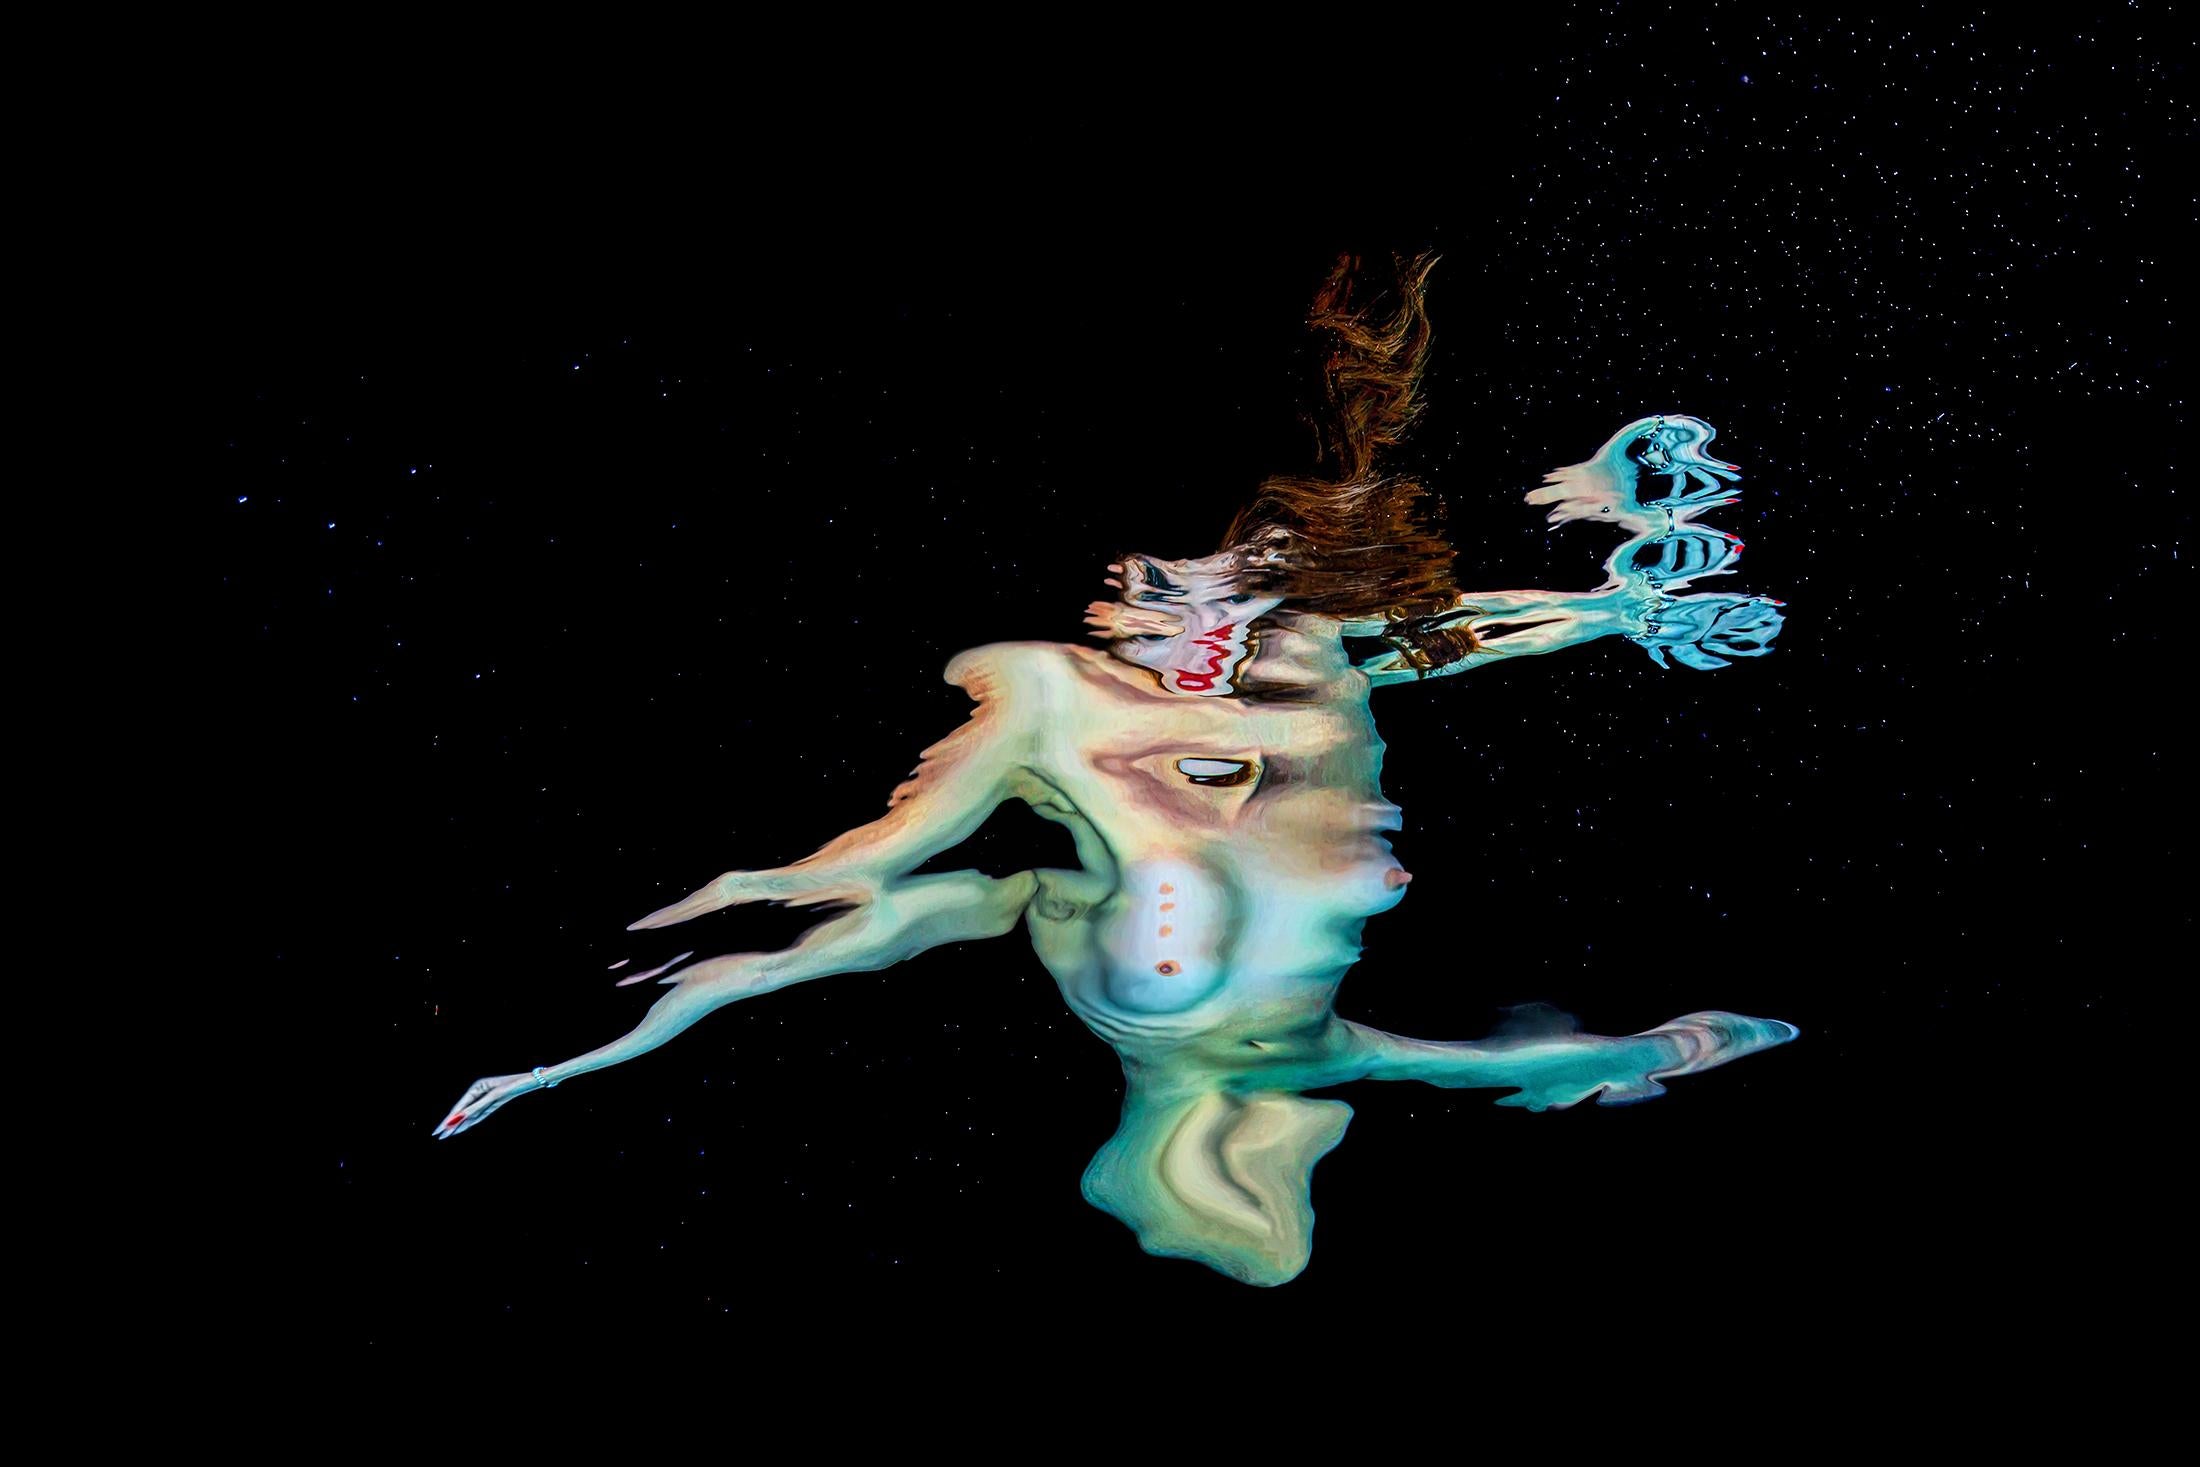 Alex Sher Nude Photograph - Capricho - underwater photograph from series REFLECTIONS - archival print 16x24"